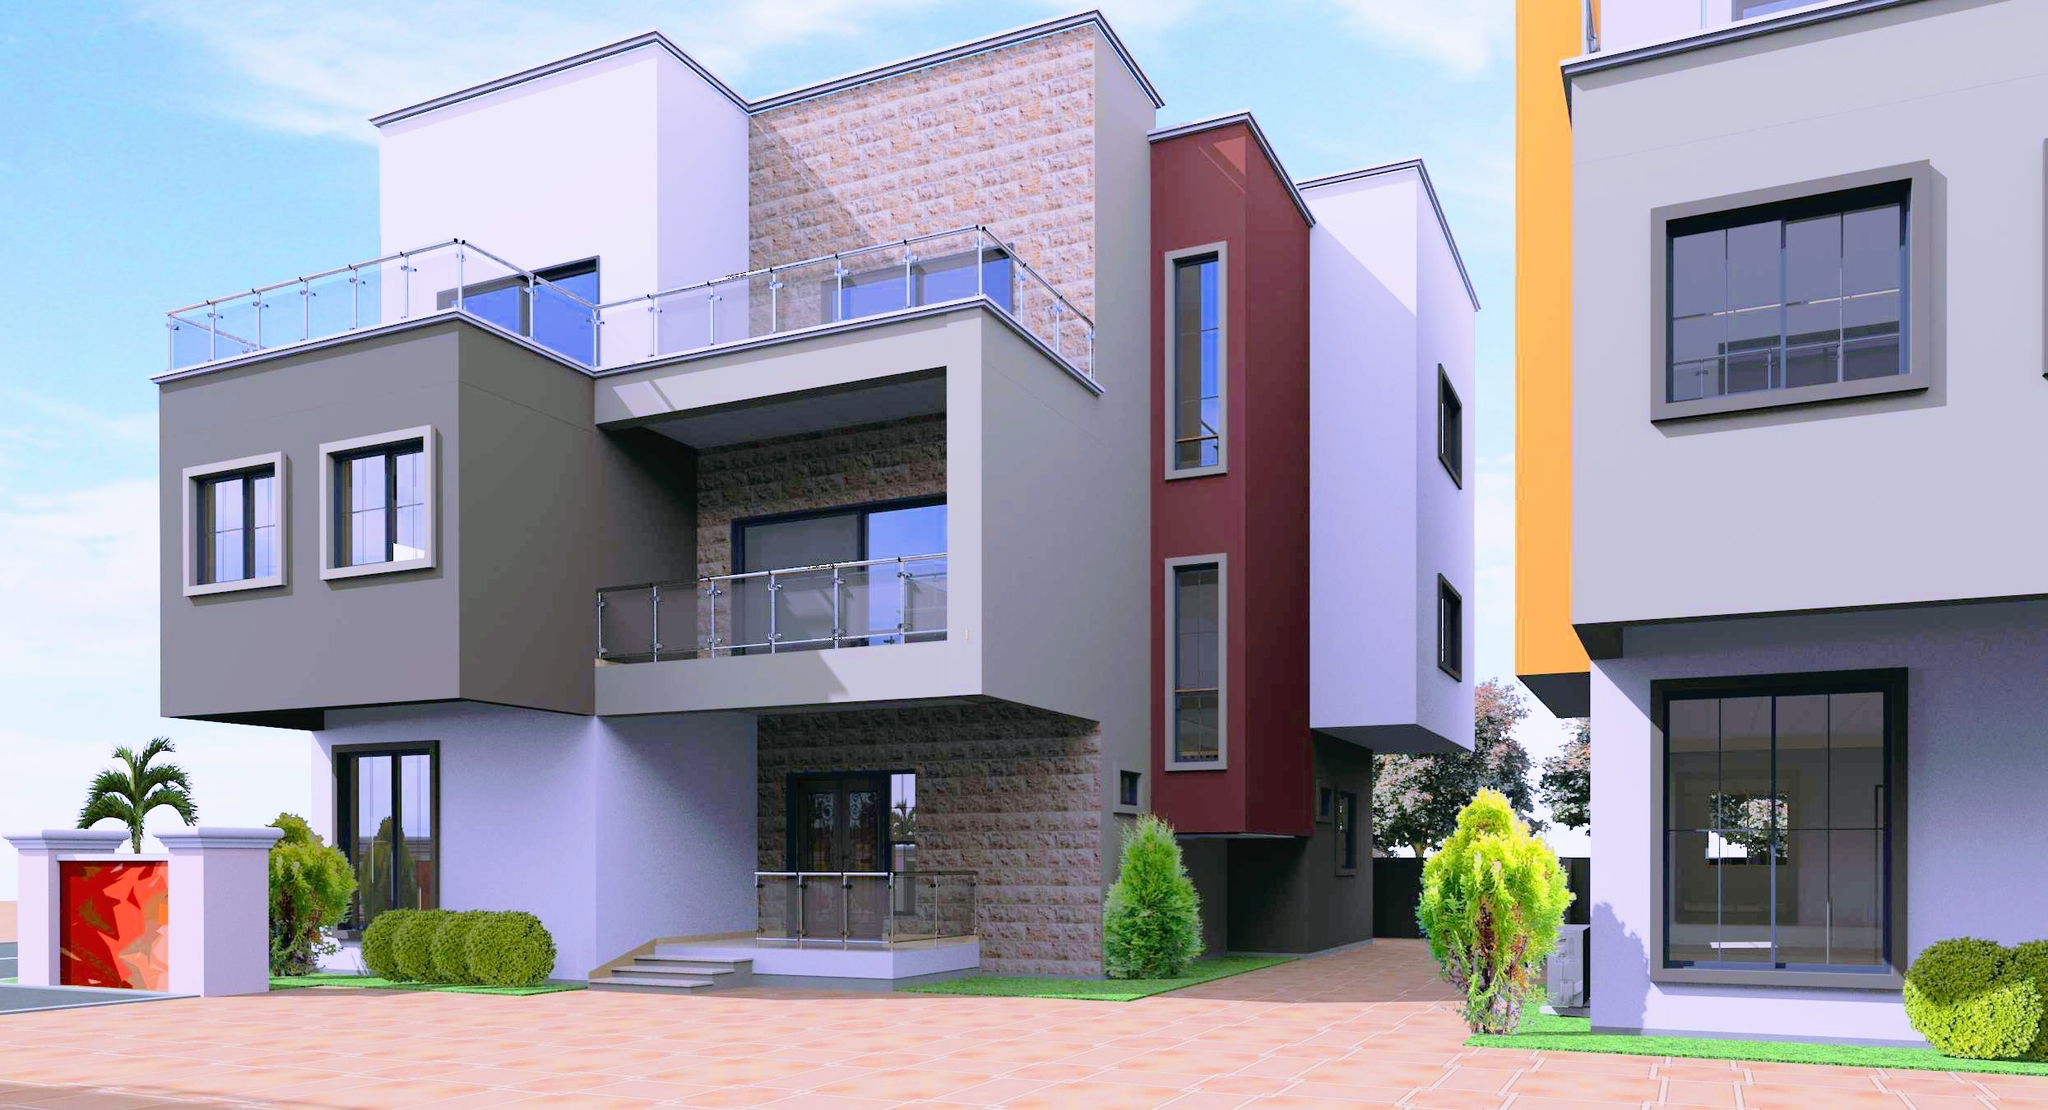 4 BEDROOM TOWNHOUSE FOR SALE AT ROMAN RIDGE